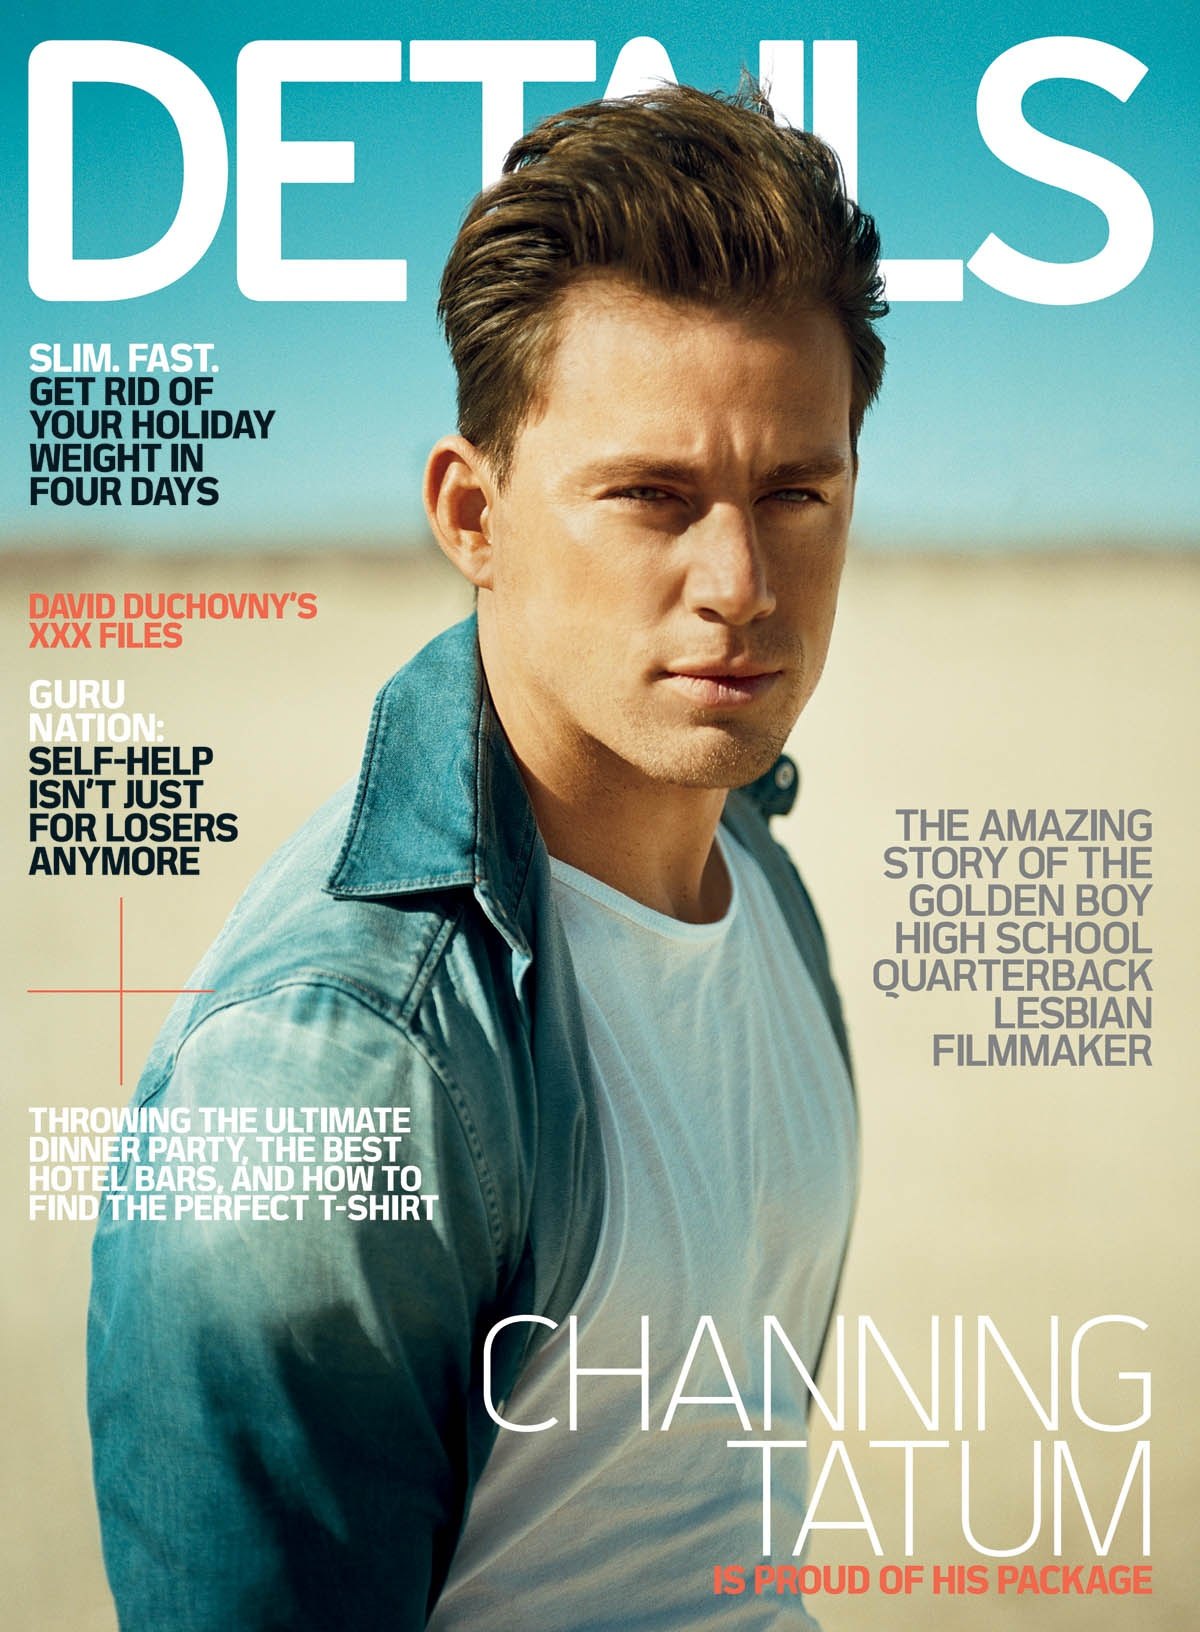 Channing Tatum Featured in February 2010 Details Magazine